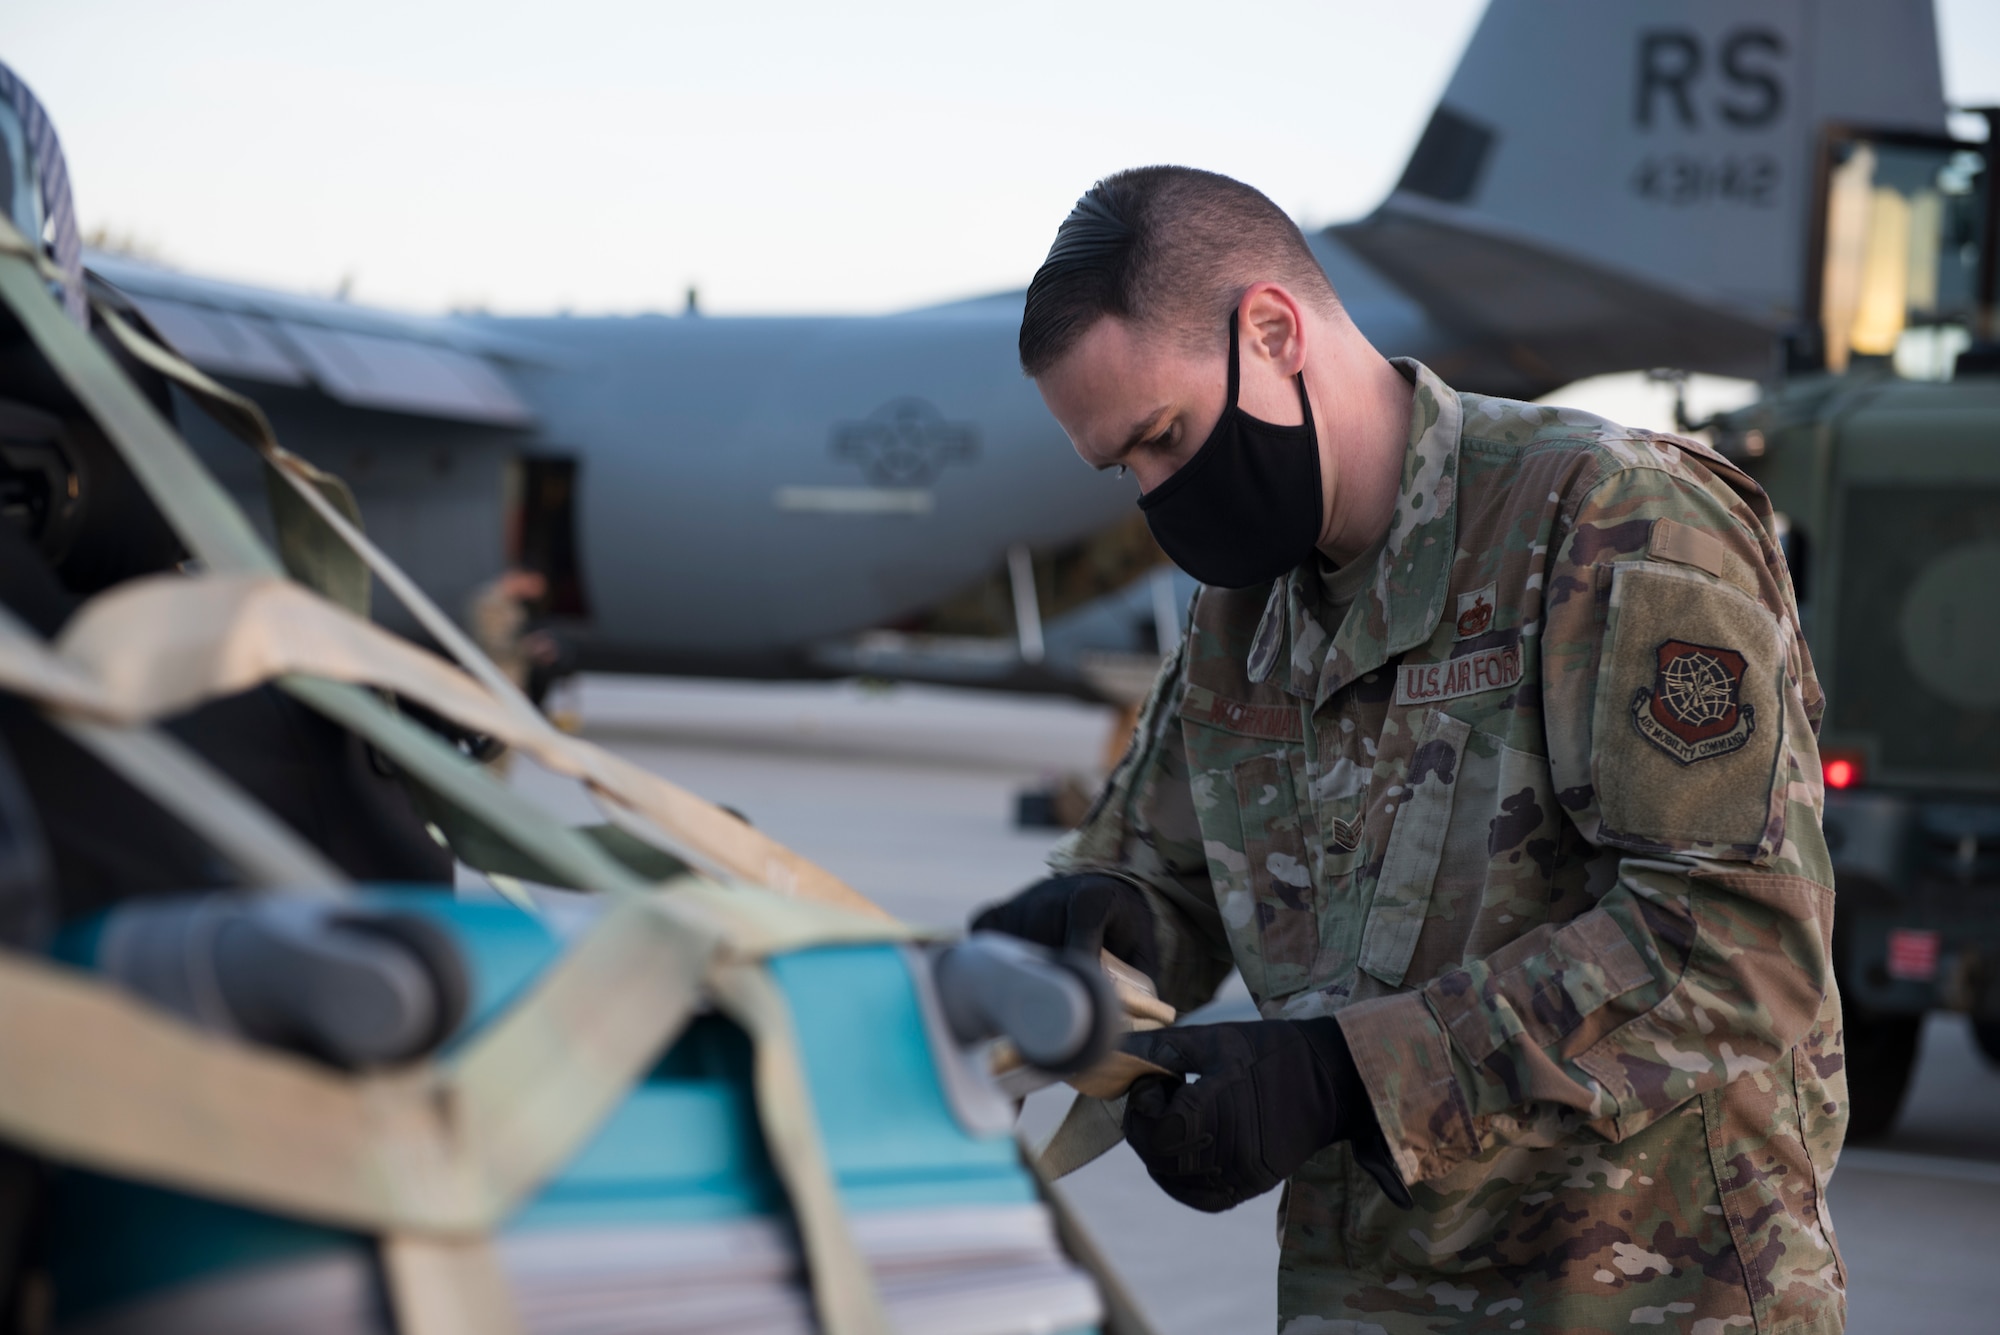 An Airman fastens luggage to a pallet